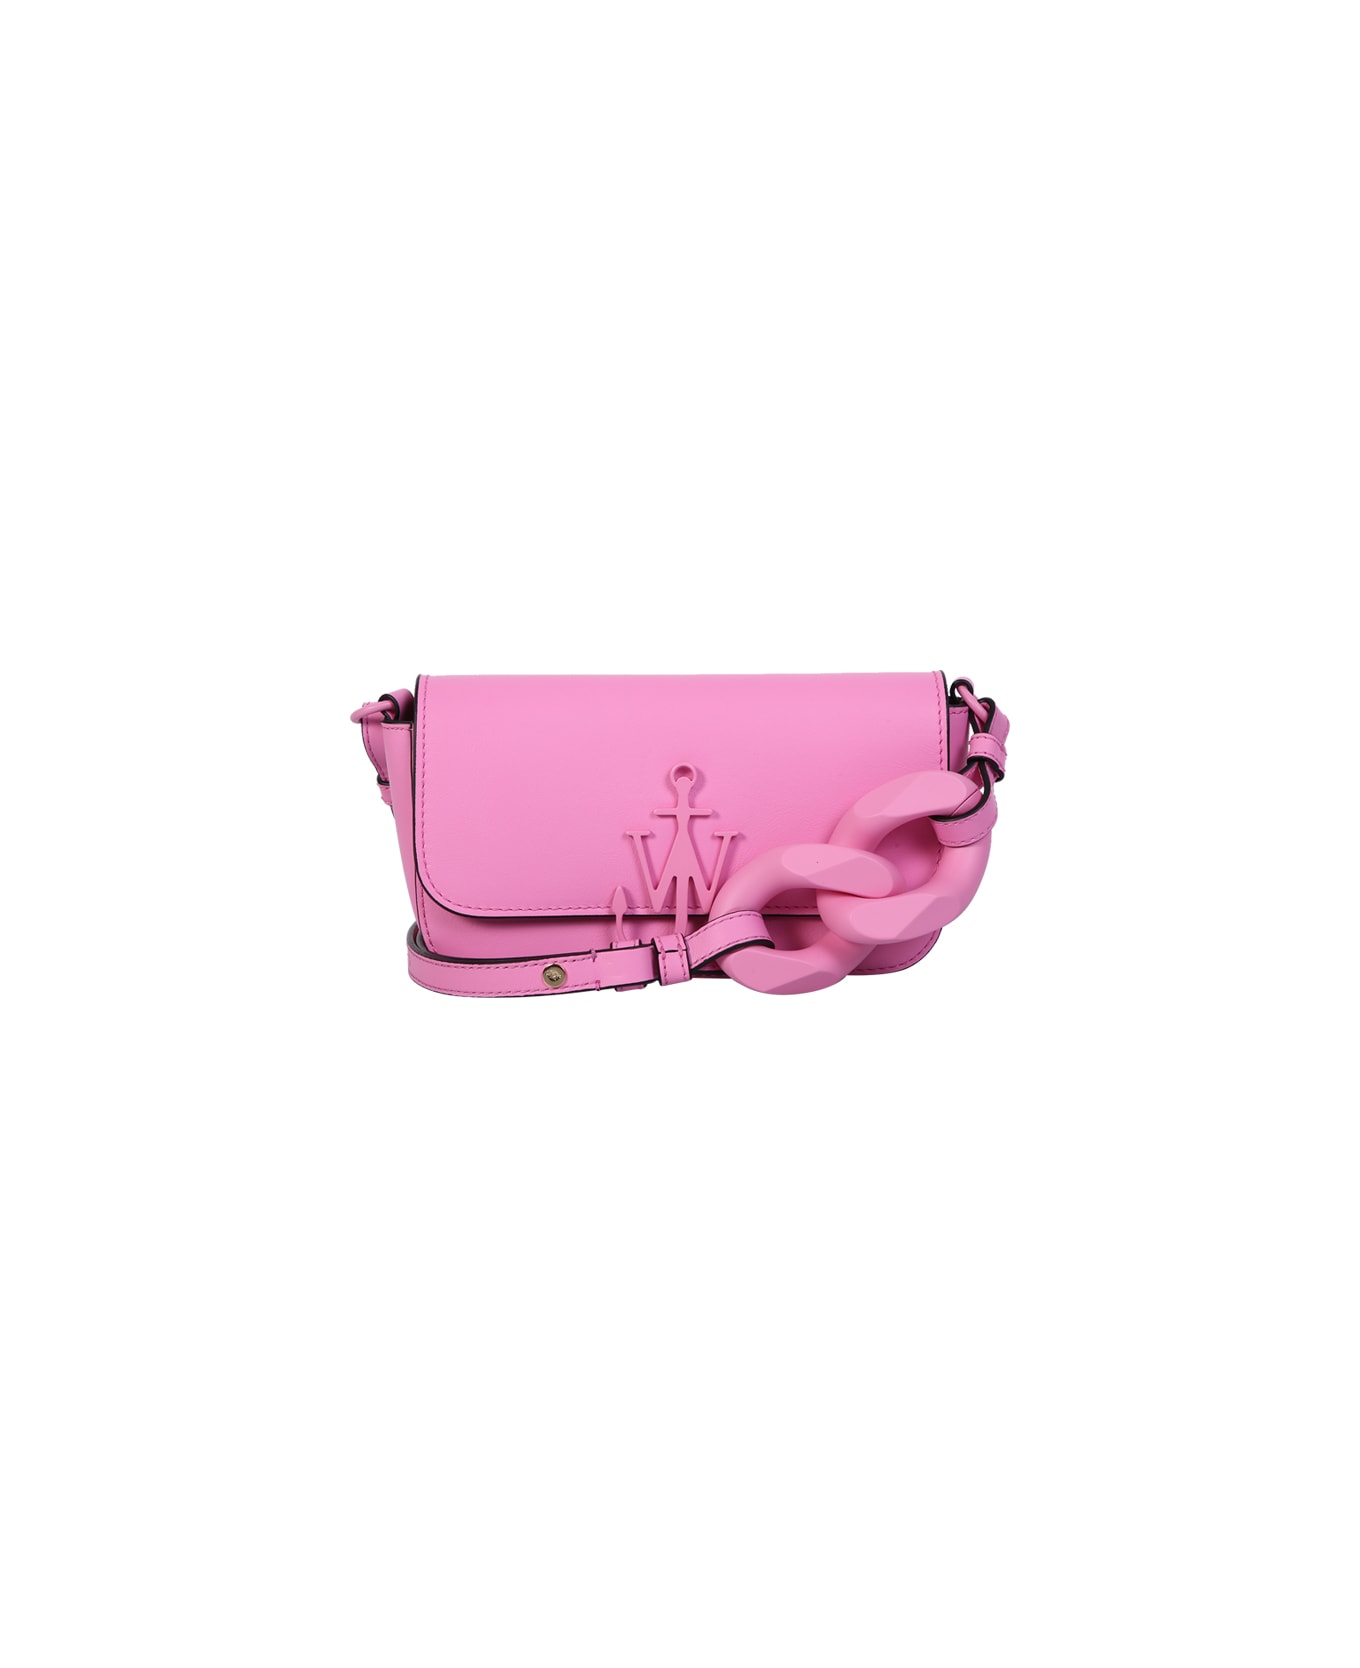 J.W. Anderson Chain Baguette Anchor Pink Bag - Pink